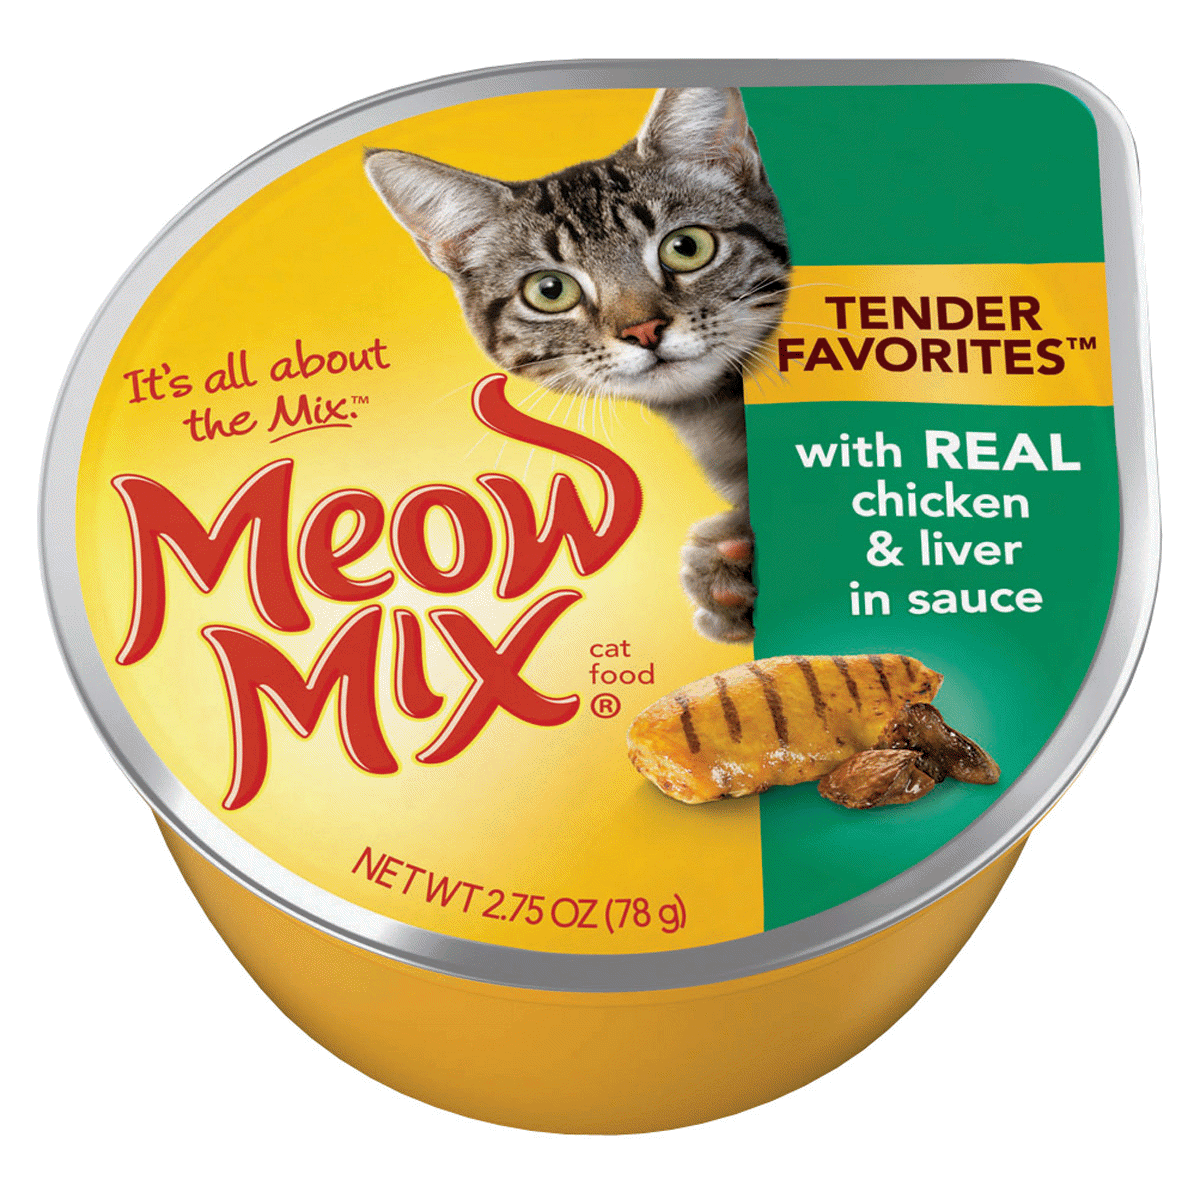 slide 1 of 1, Meow Mix Tender Favorites Cat Food, with Real Chicken & Liver in Sauce, 2.75 oz